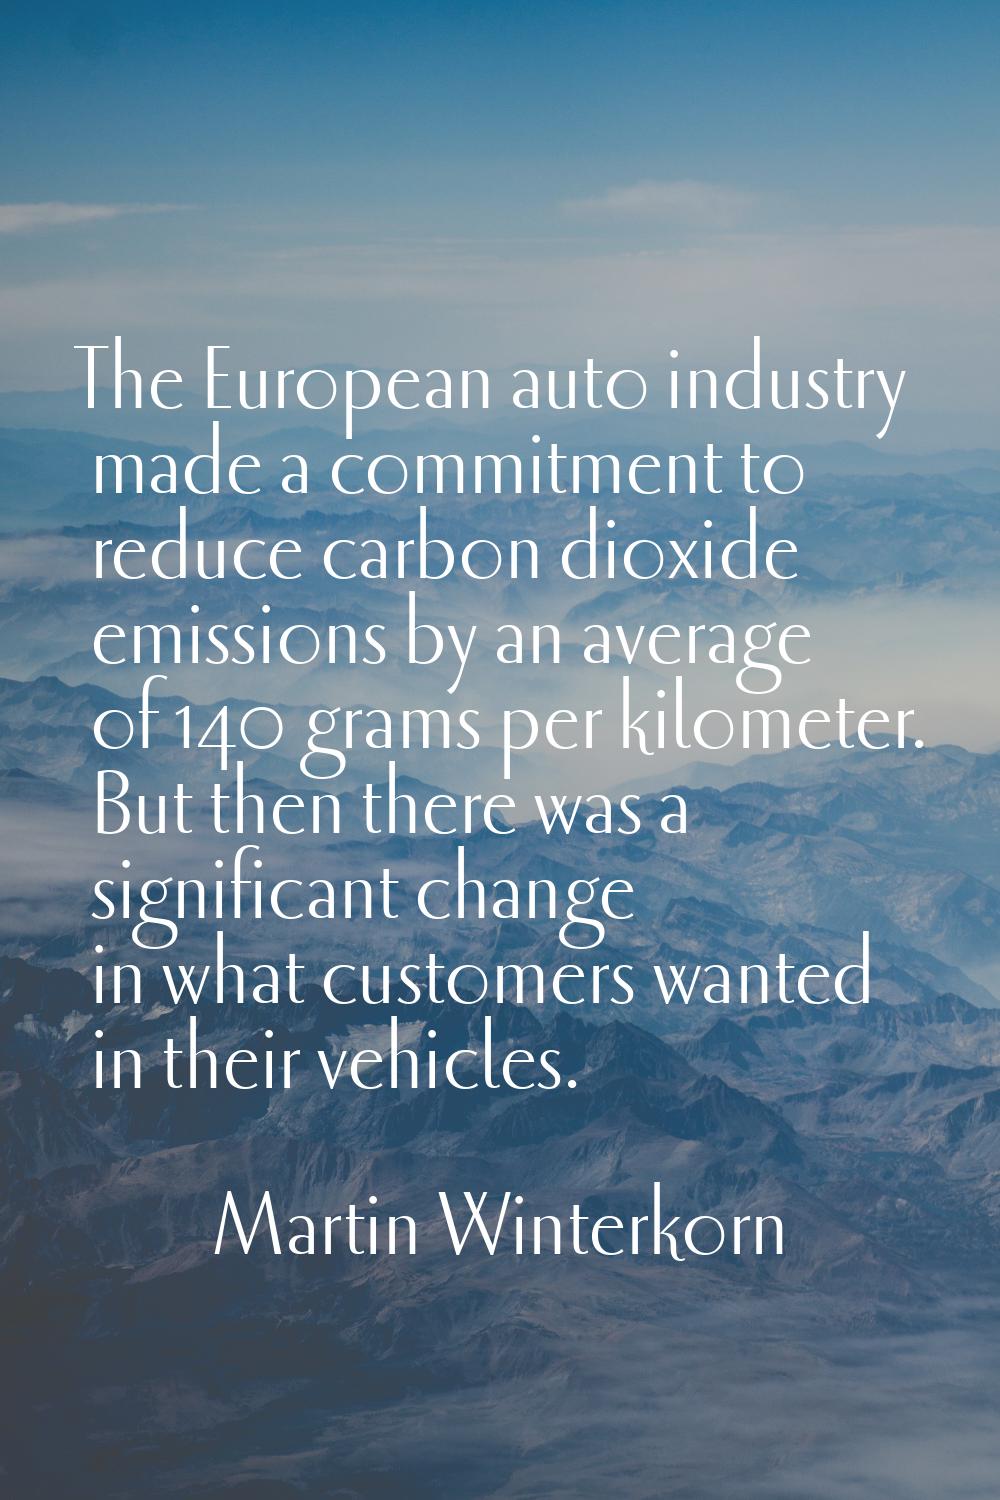 The European auto industry made a commitment to reduce carbon dioxide emissions by an average of 14